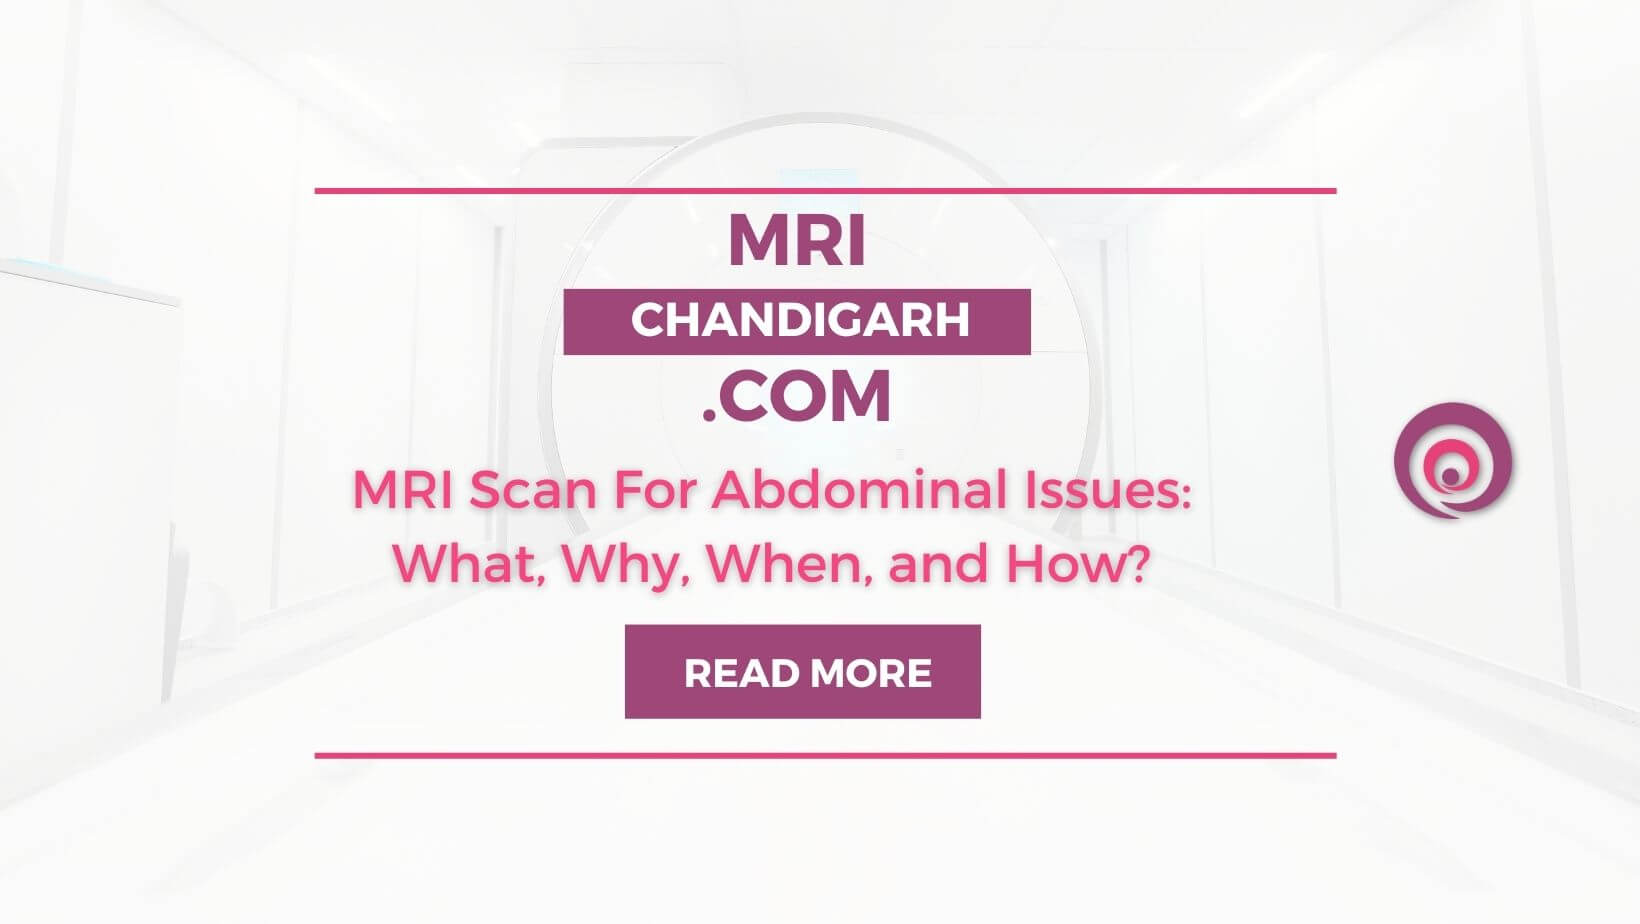 MRI Scan For Abdominal Issues: What, Why, When, and How?